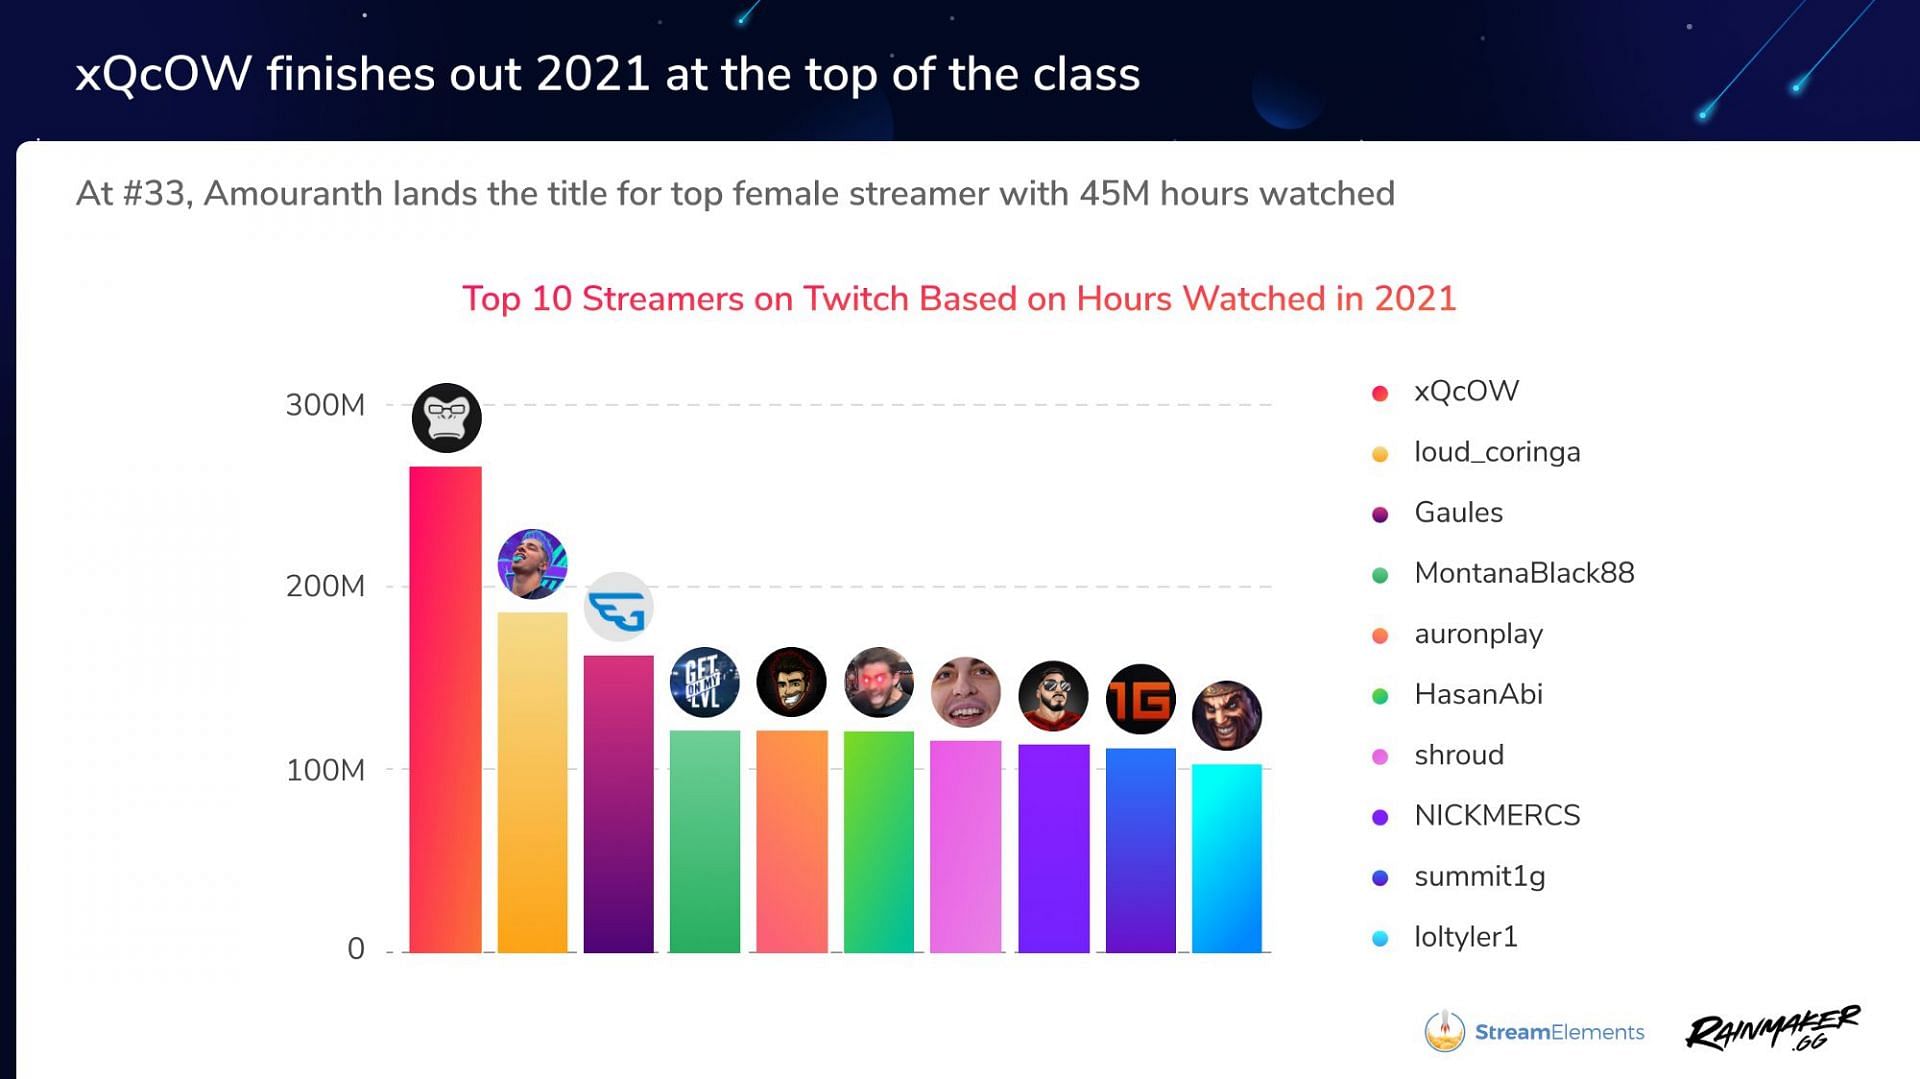 xQc emerges as the top Twitch streamer in 2021 (Image via StreamElements)